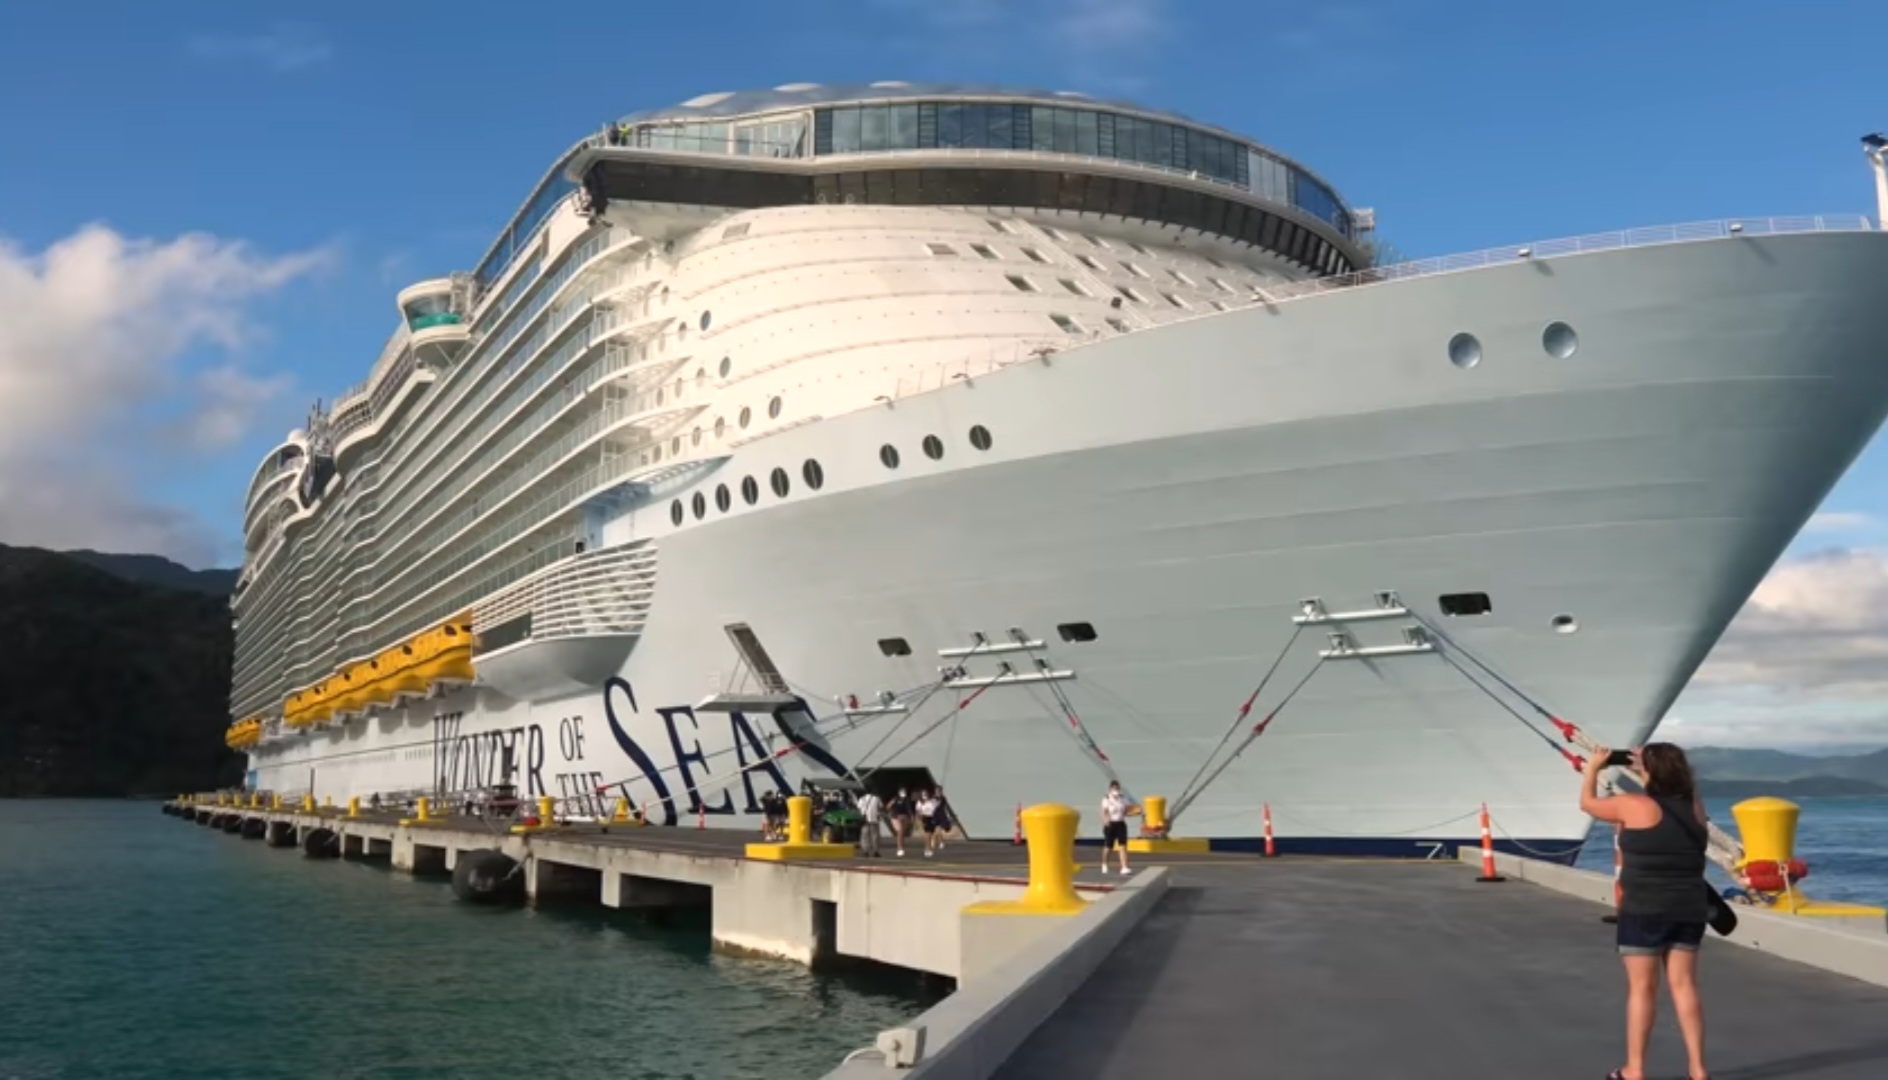 Cruise In The Royal Caribbean Wonder Of The Seas: The World Largest Cruise Ship.